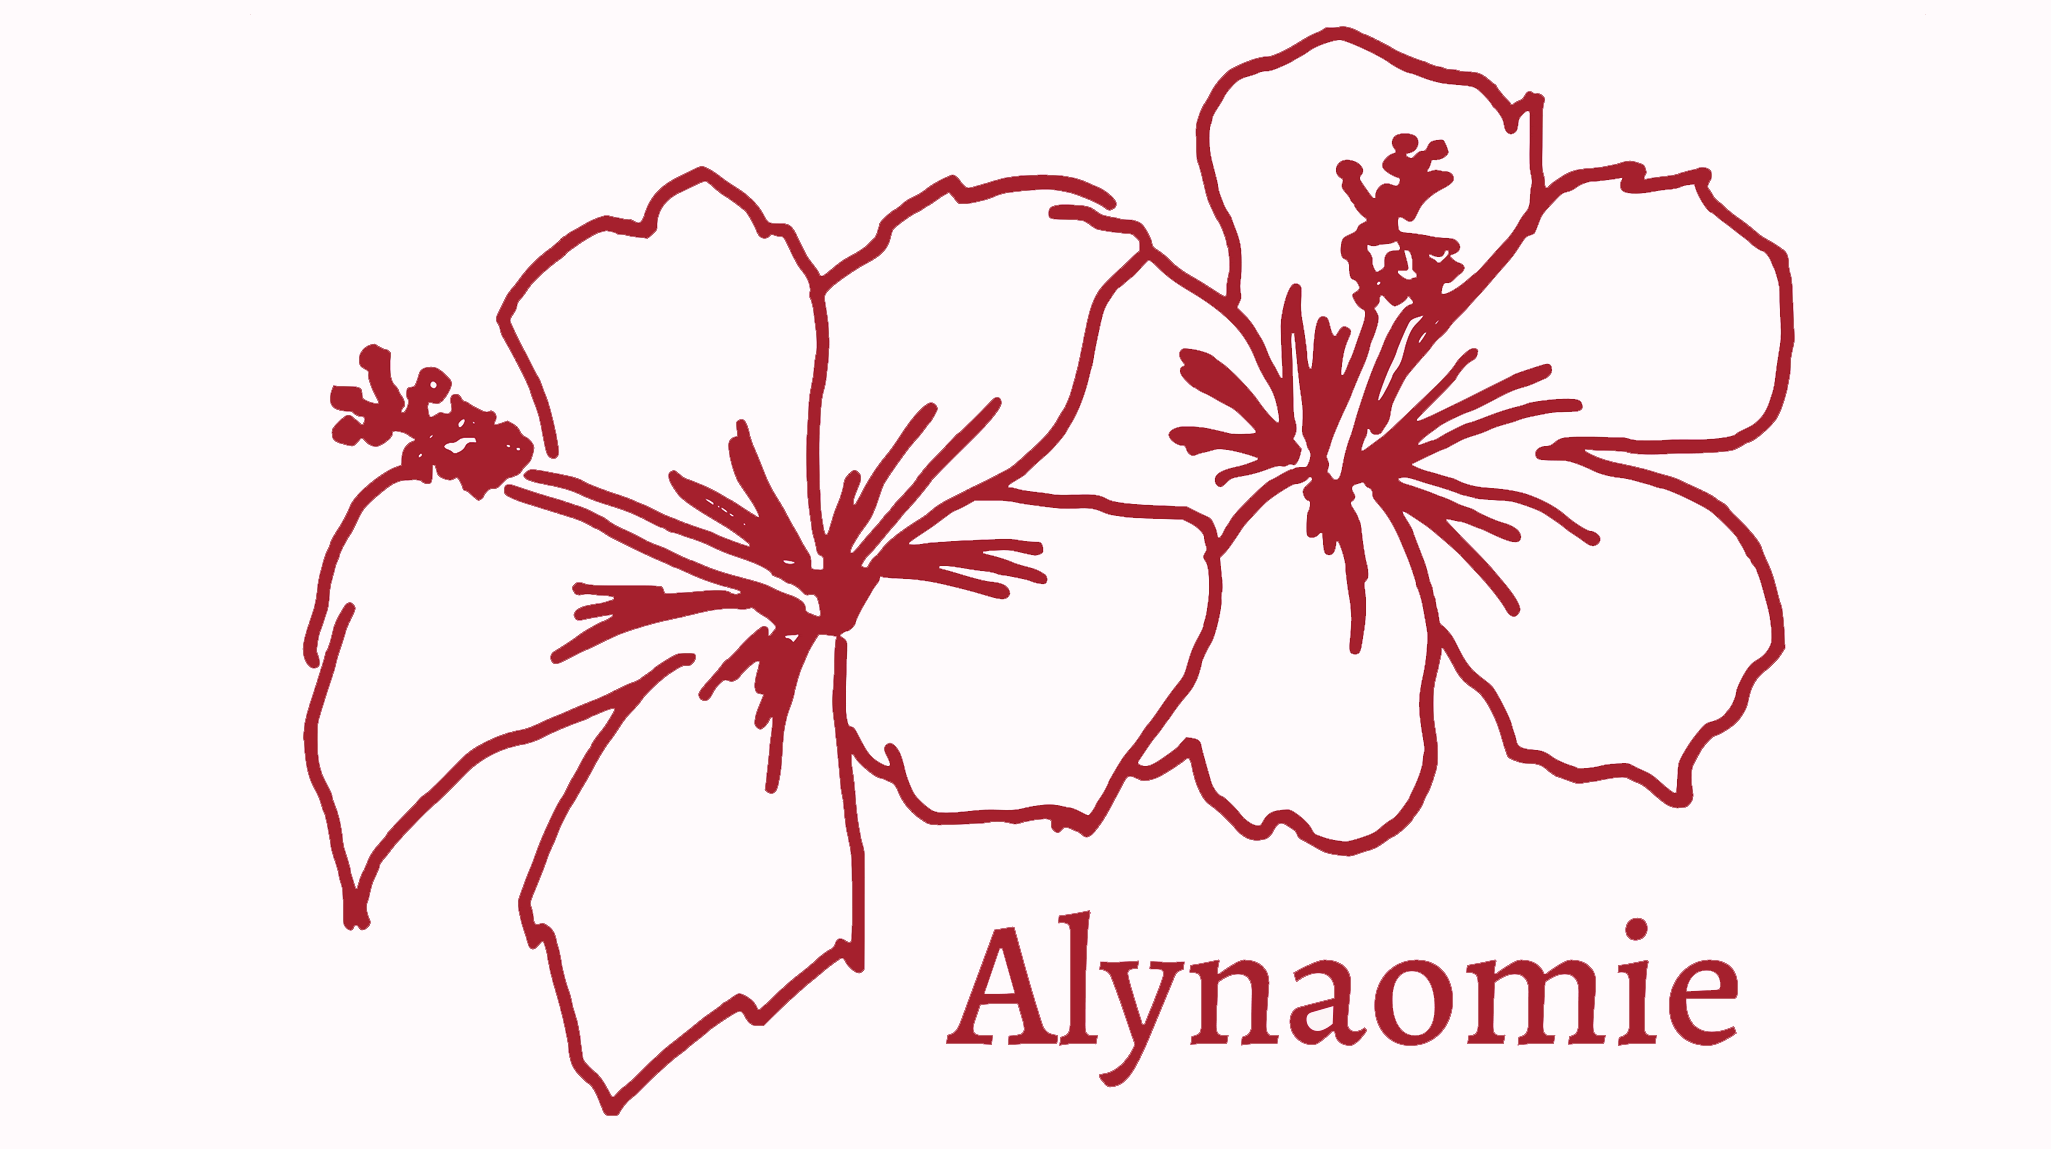 Red line drawing of a pair of tropical hibiscus flowers with the text 'Alynaomie' written small in a antique-looking font below it